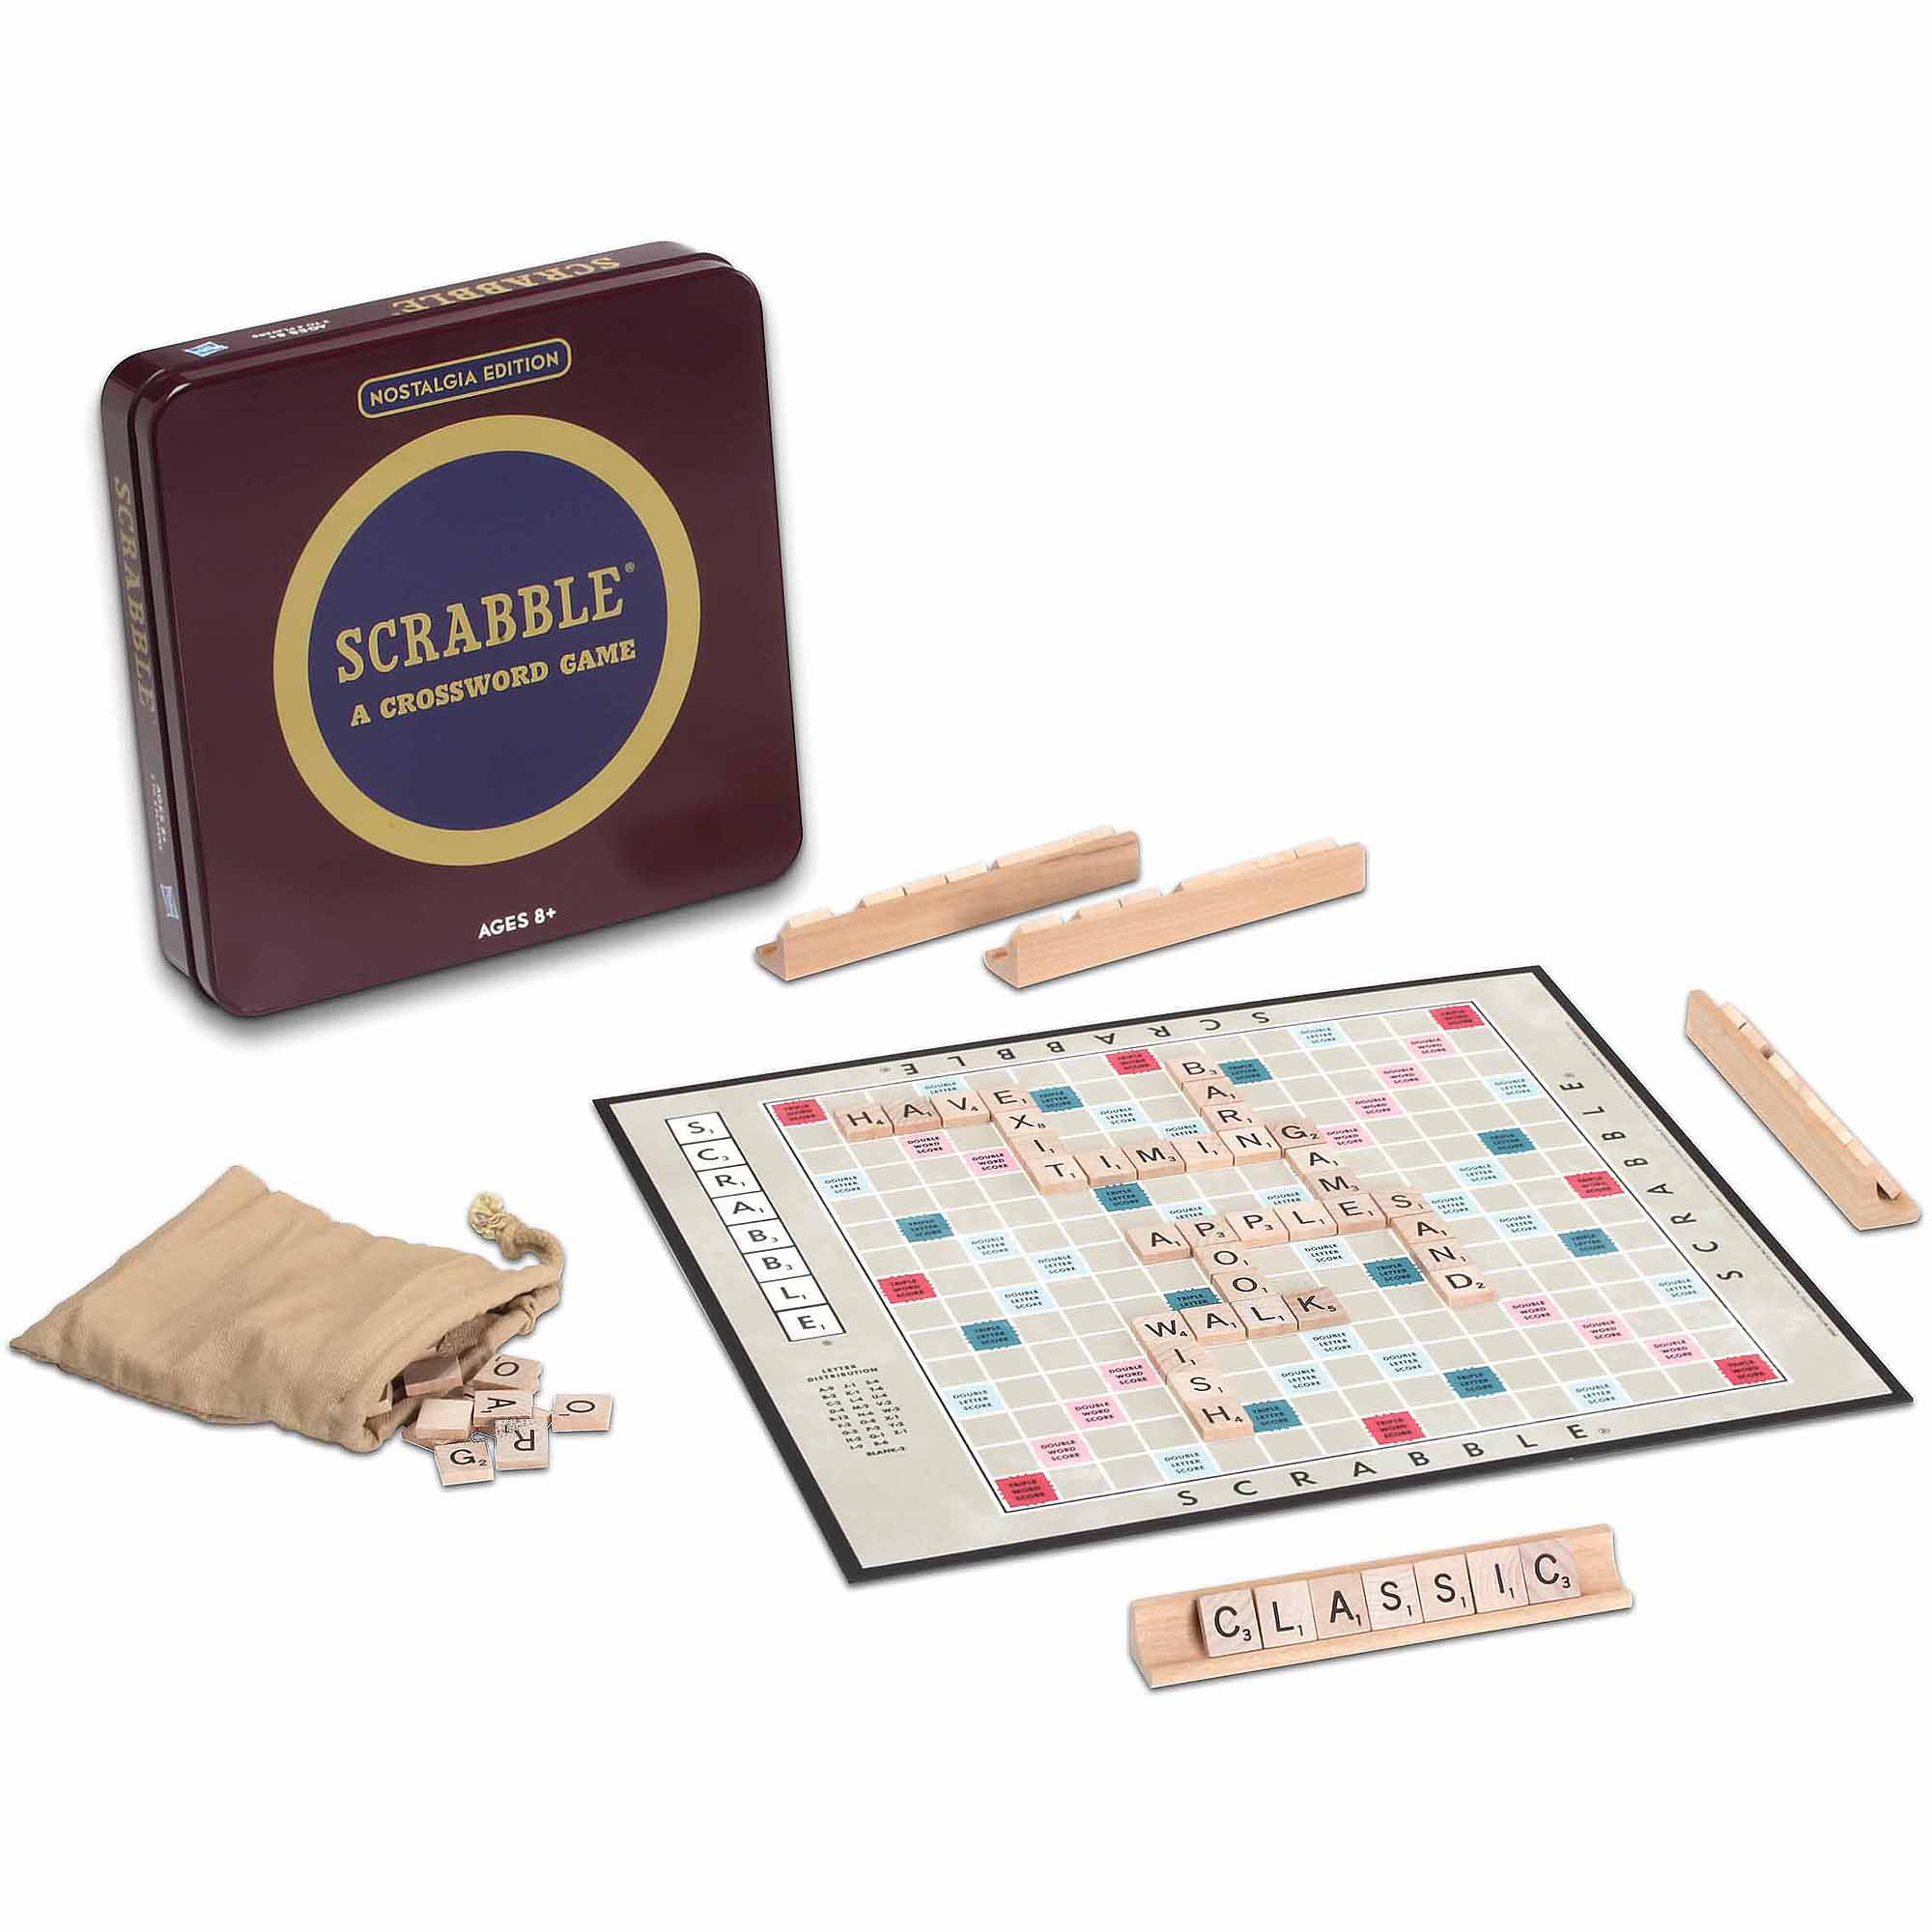 RARE Scrabble Express Electronic Handheld Hasbro Game 4 Games 9 Levels Gr8 Gift for sale online 